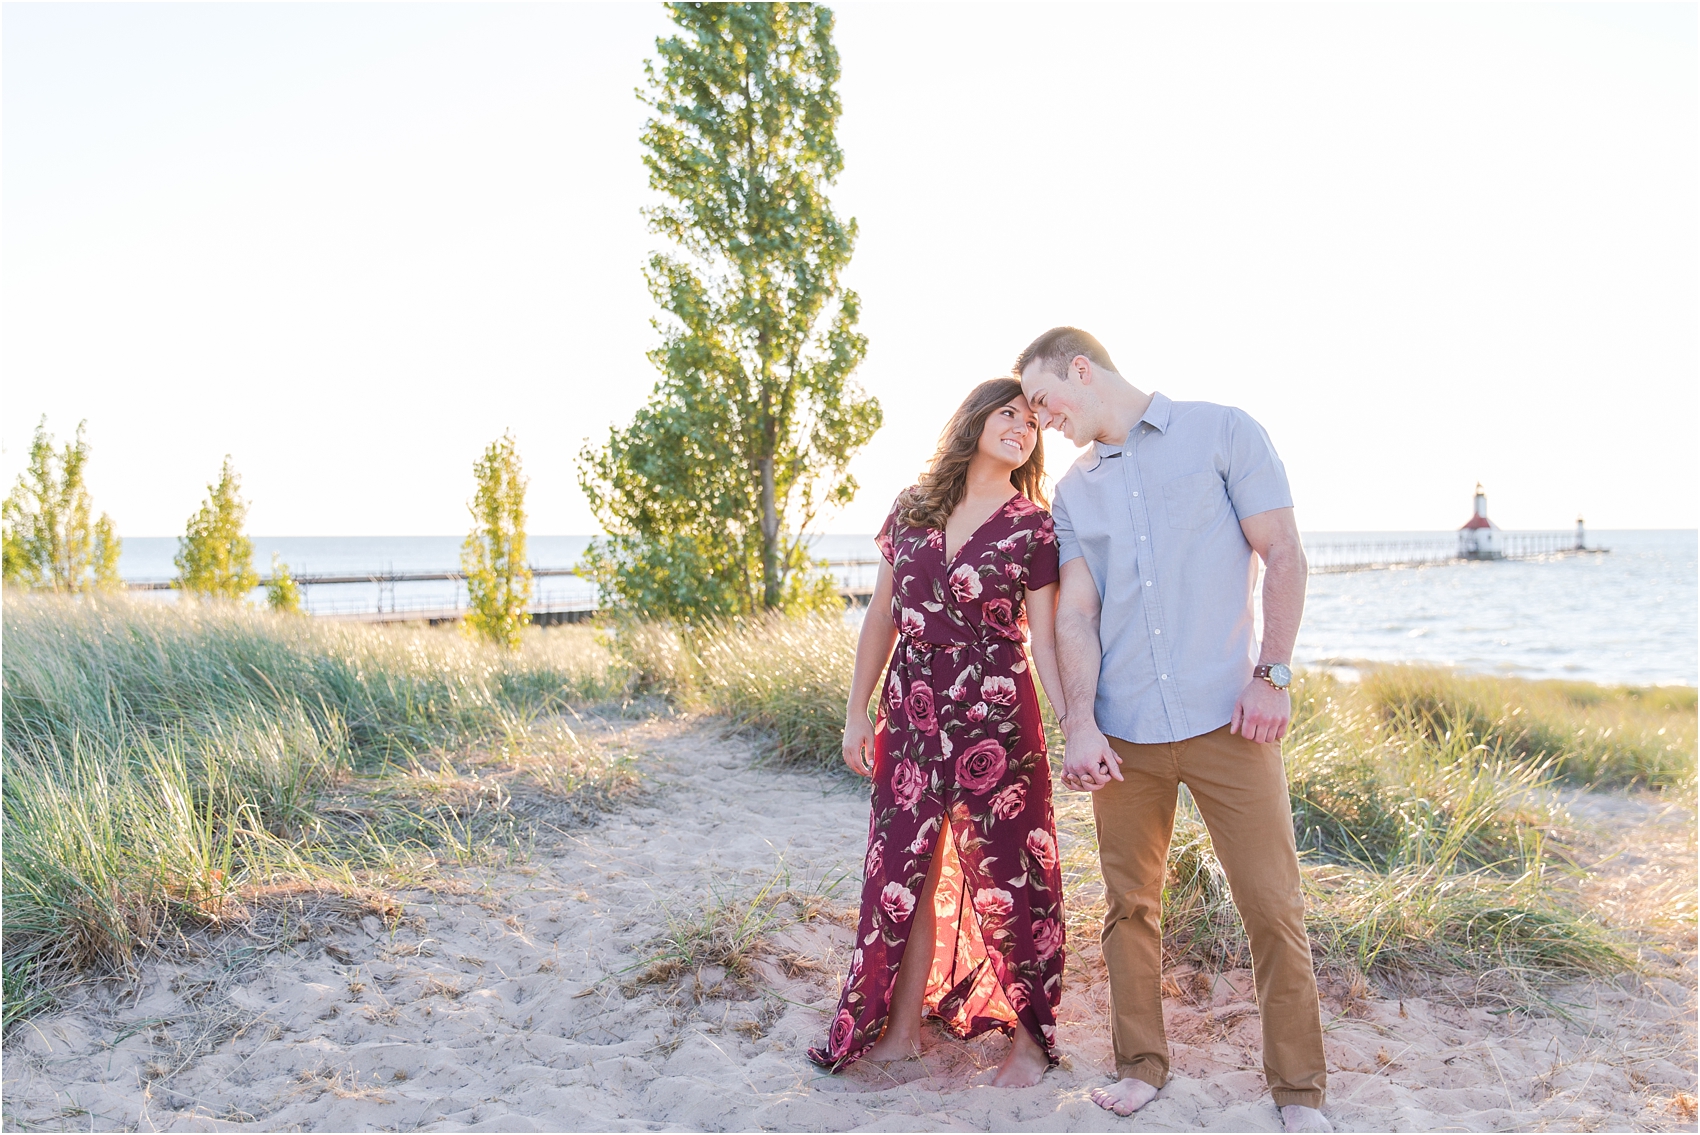 candid-end-of-summer-sunset-engagement-photos-at-silver-beach-in-st-joseph-mi-by-courtney-carolyn-photography_0029.jpg